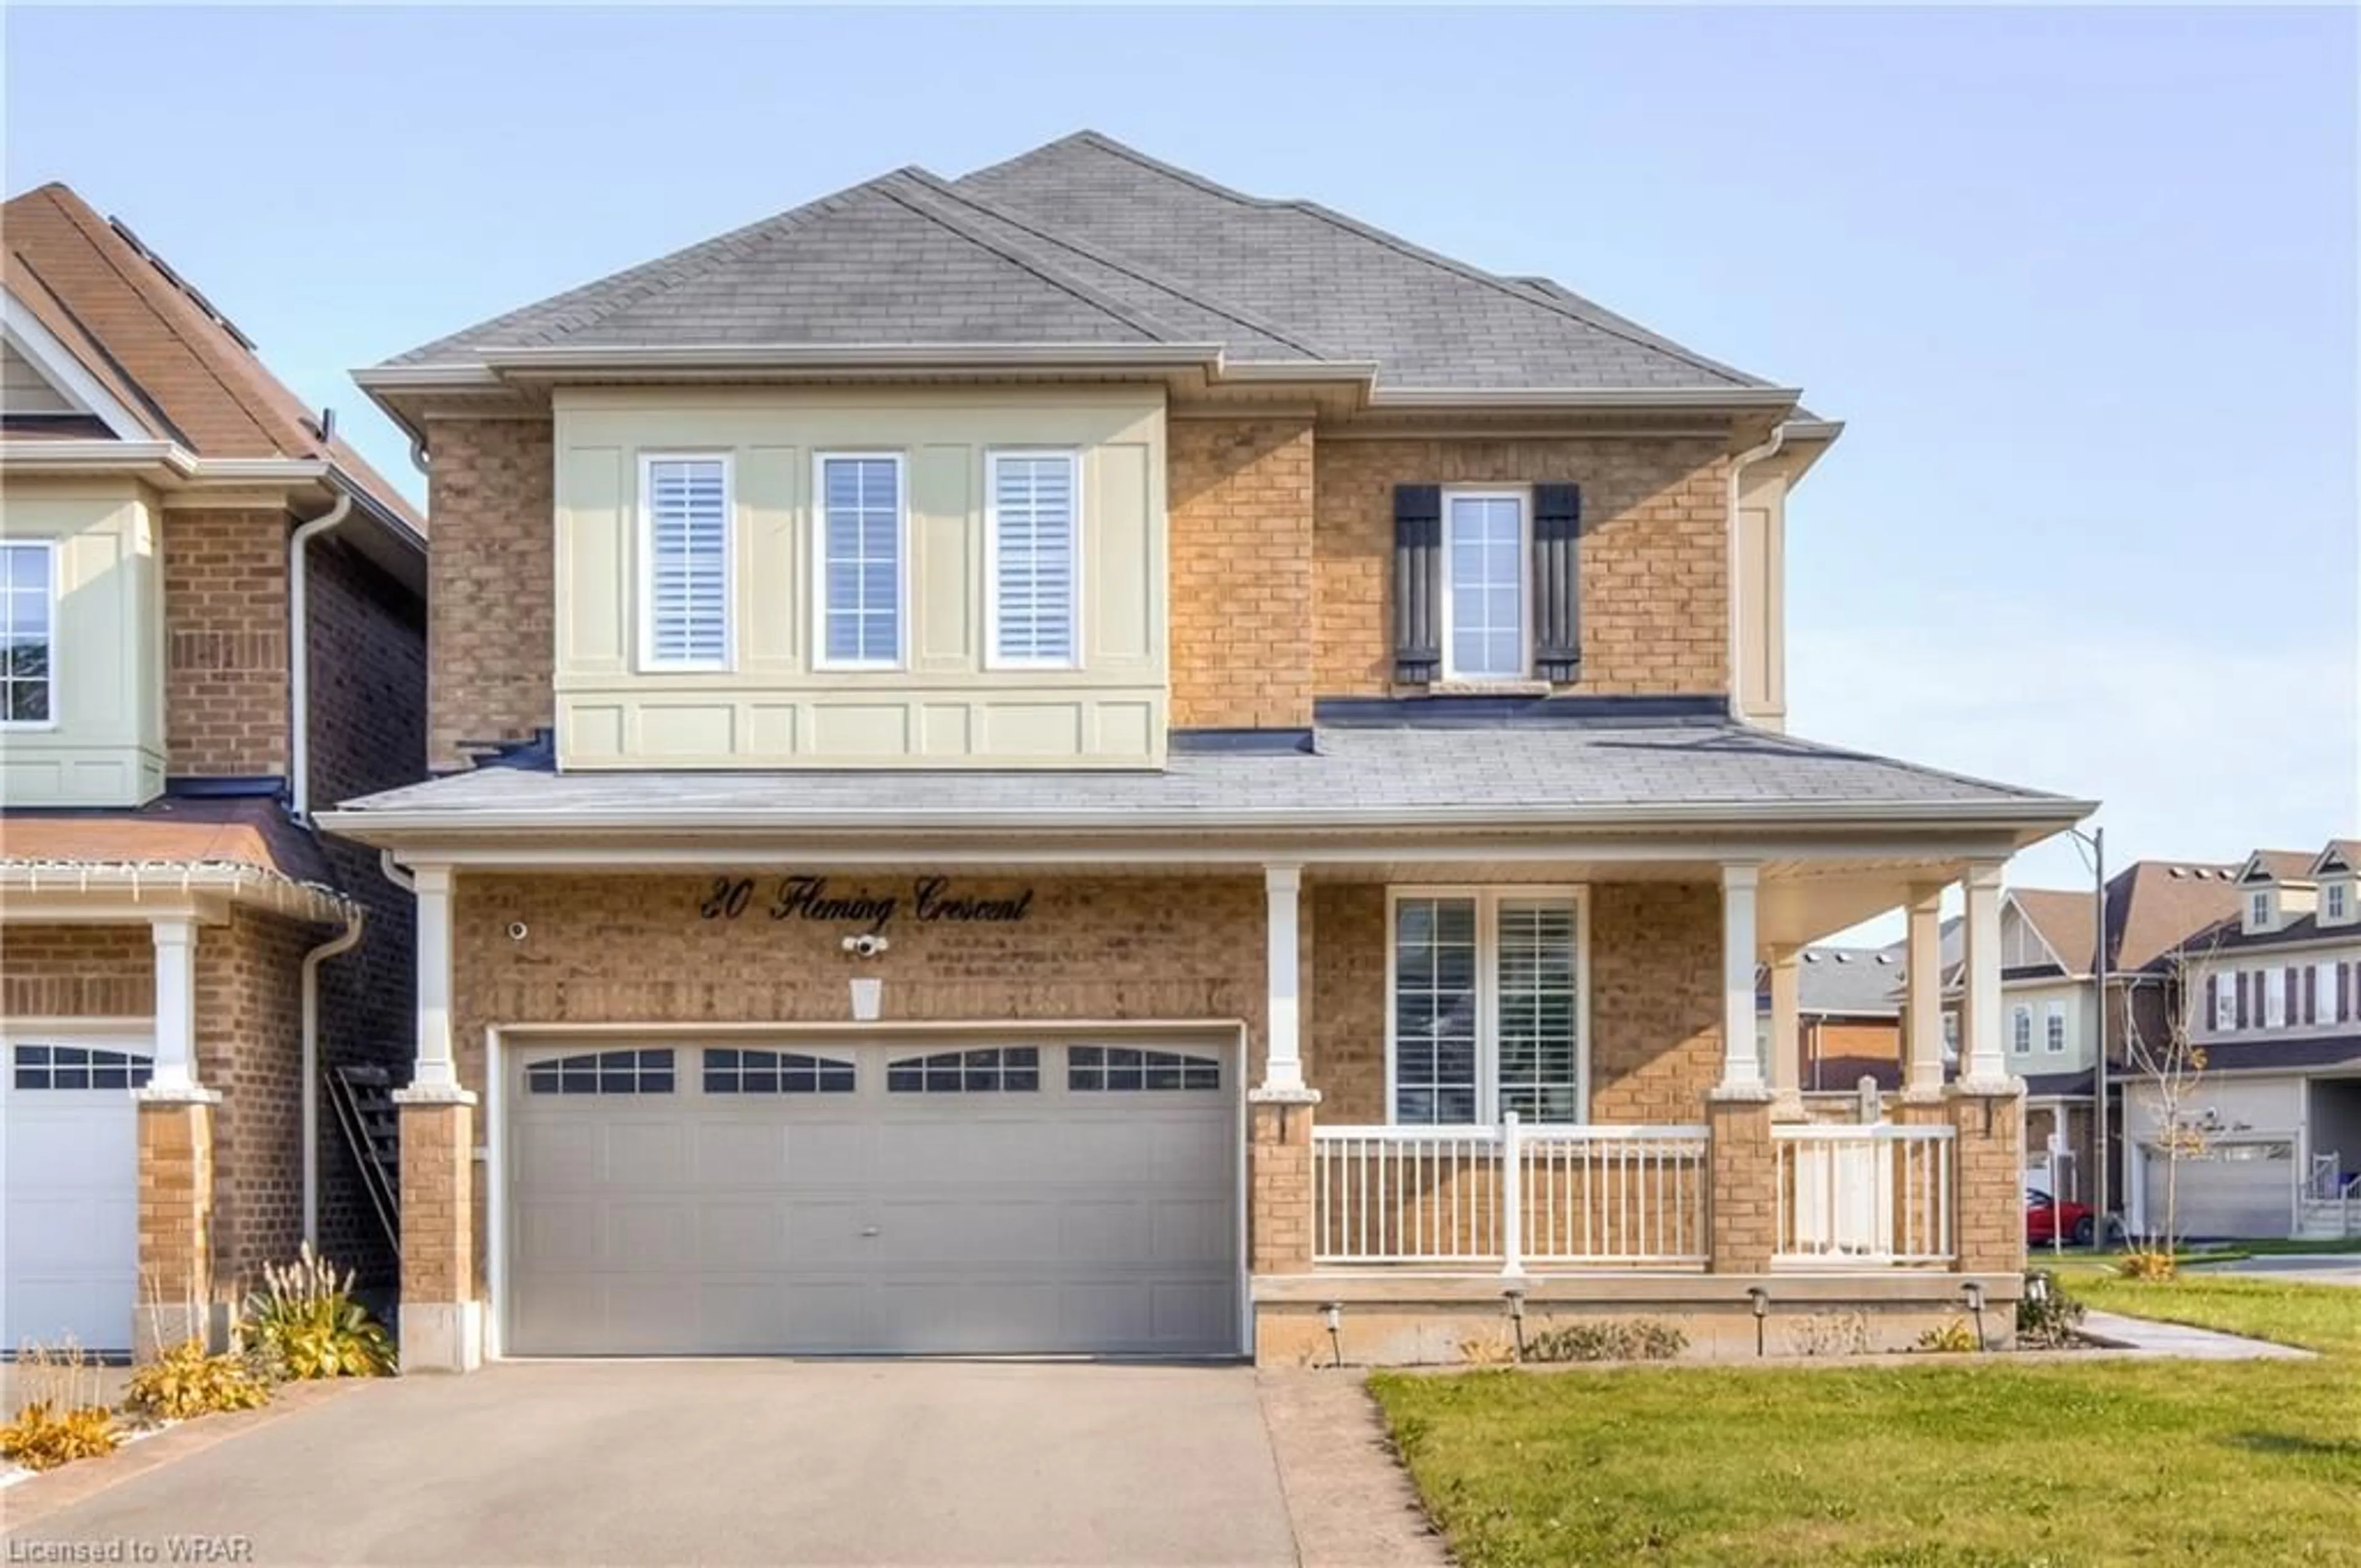 Home with brick exterior material for 30 Fleming Cres, Caledonia Ontario N3W 0C4